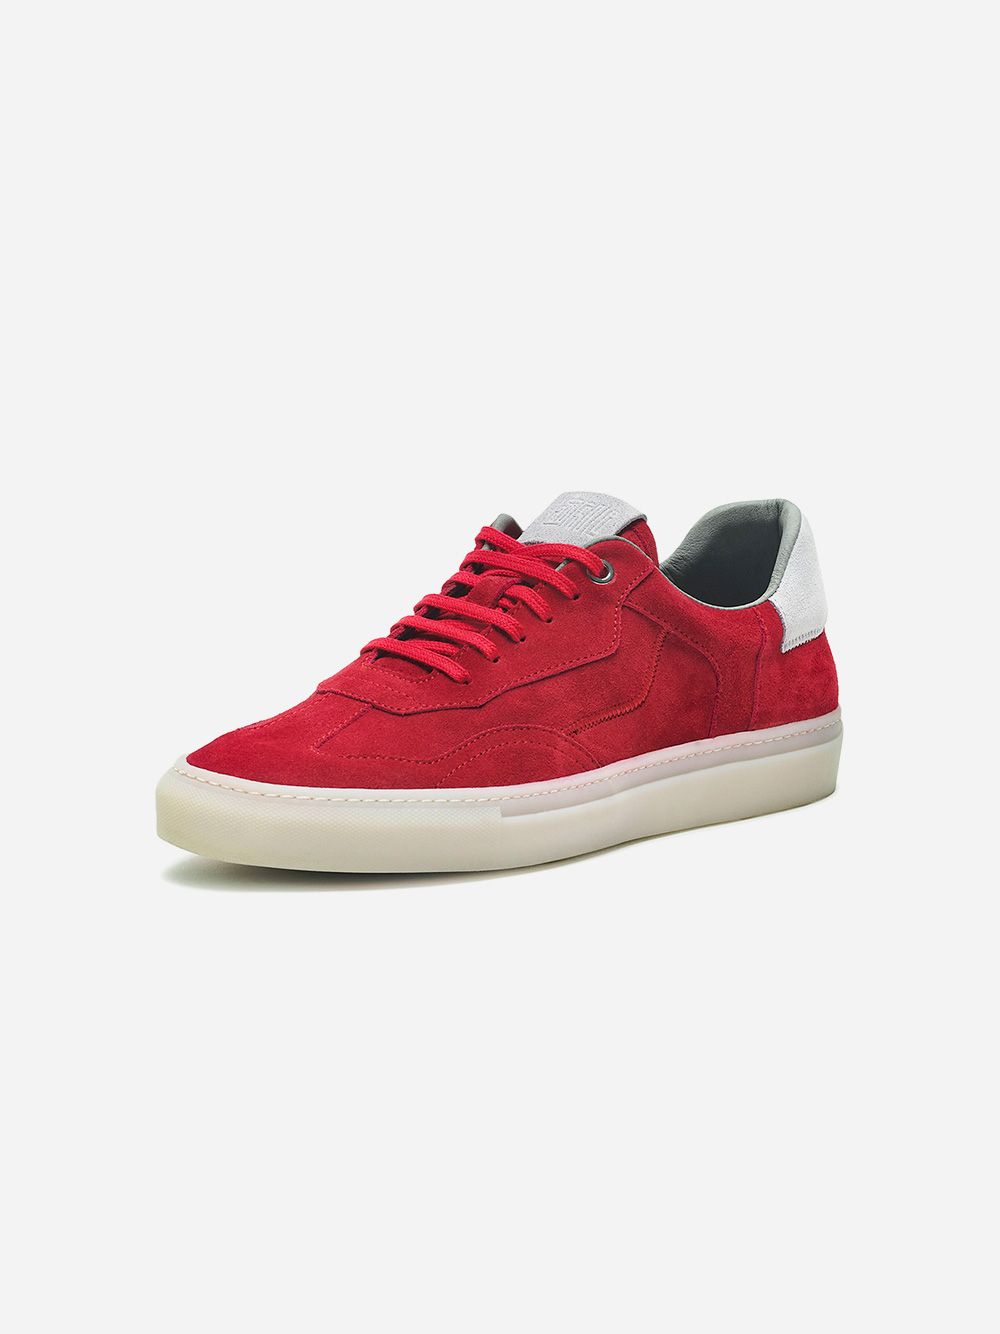 Sapatilhas Ice Red | Last Sole